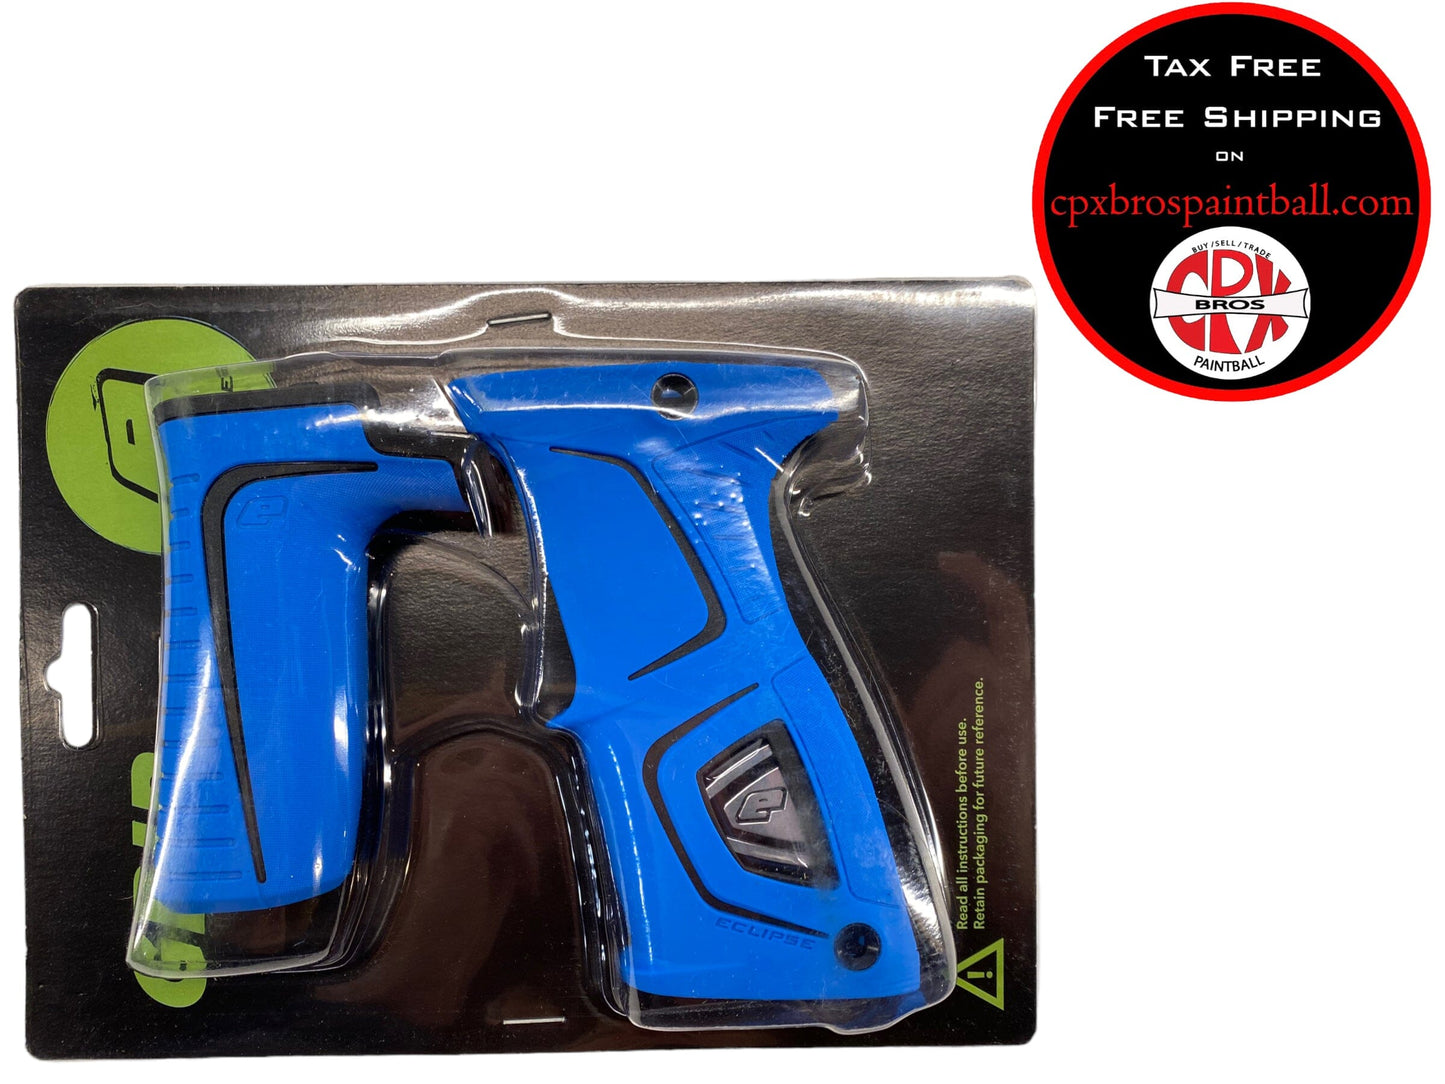 Used New Blue Planet Eclipse Paintball Grip Kit Gtek170r Paintball Gun from CPXBrosPaintball Buy/Sell/Trade Paintball Markers, Paintball Hoppers, Paintball Masks, and Hormesis Headbands